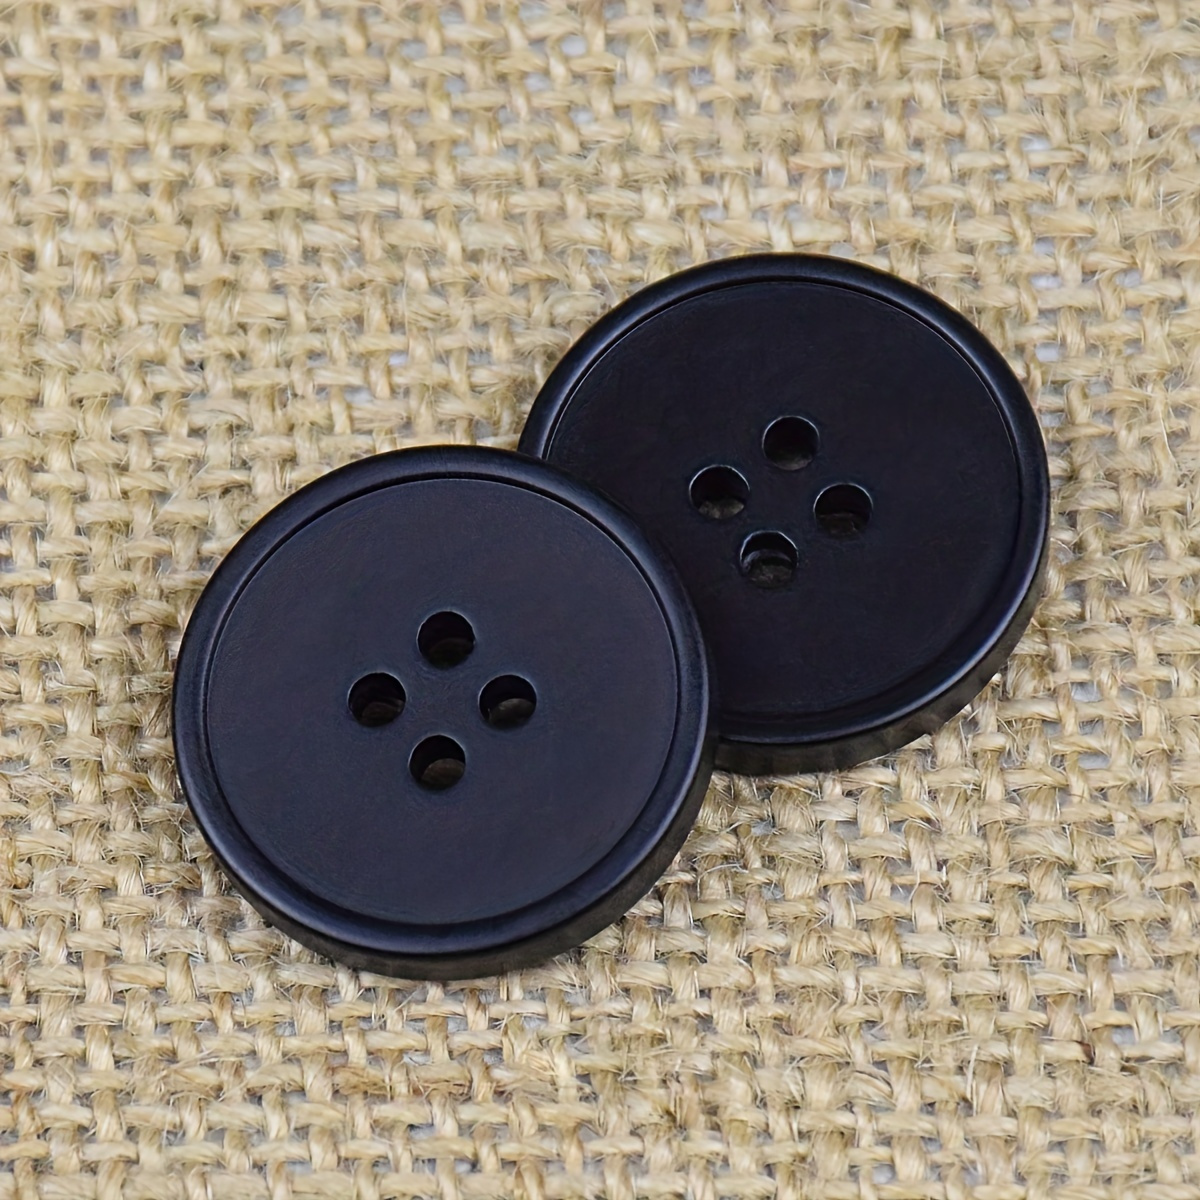 10pcs 30mm Round Brown Buttons For DIY Sewing Crafts Knitting Coat Uniform  Costume Shirt Crochet Card Making Scrapbooking